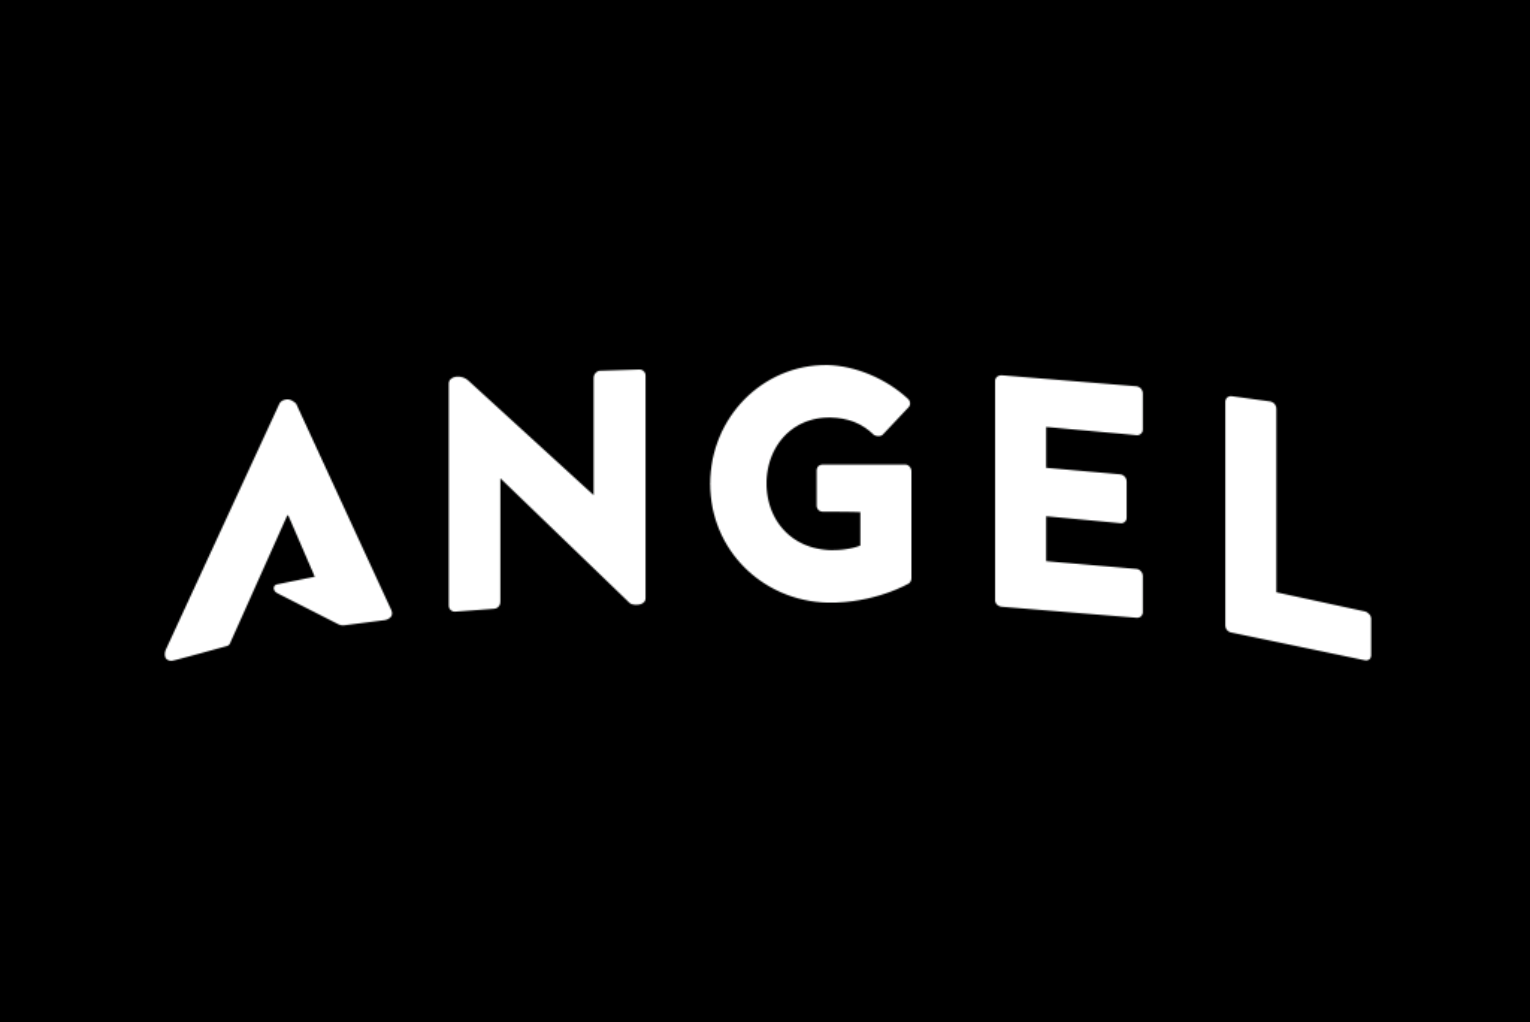 Angel Studios to Appeal ‘The Chosen’ Departure Decision